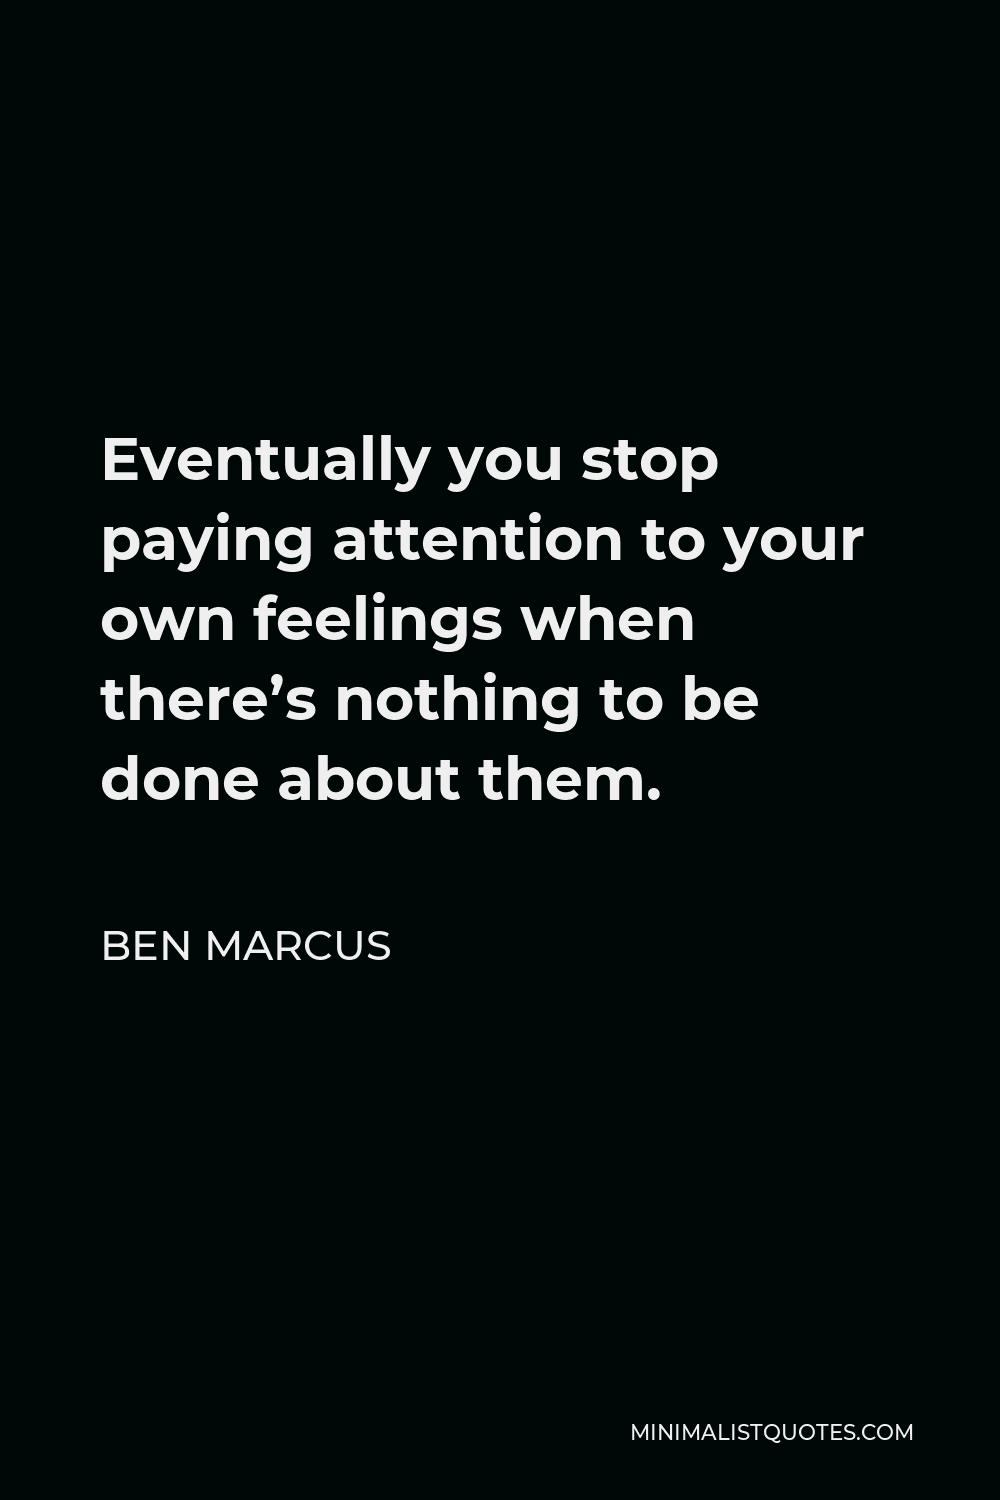 Ben Marcus Quote - Eventually you stop paying attention to your own feelings when there’s nothing to be done about them.